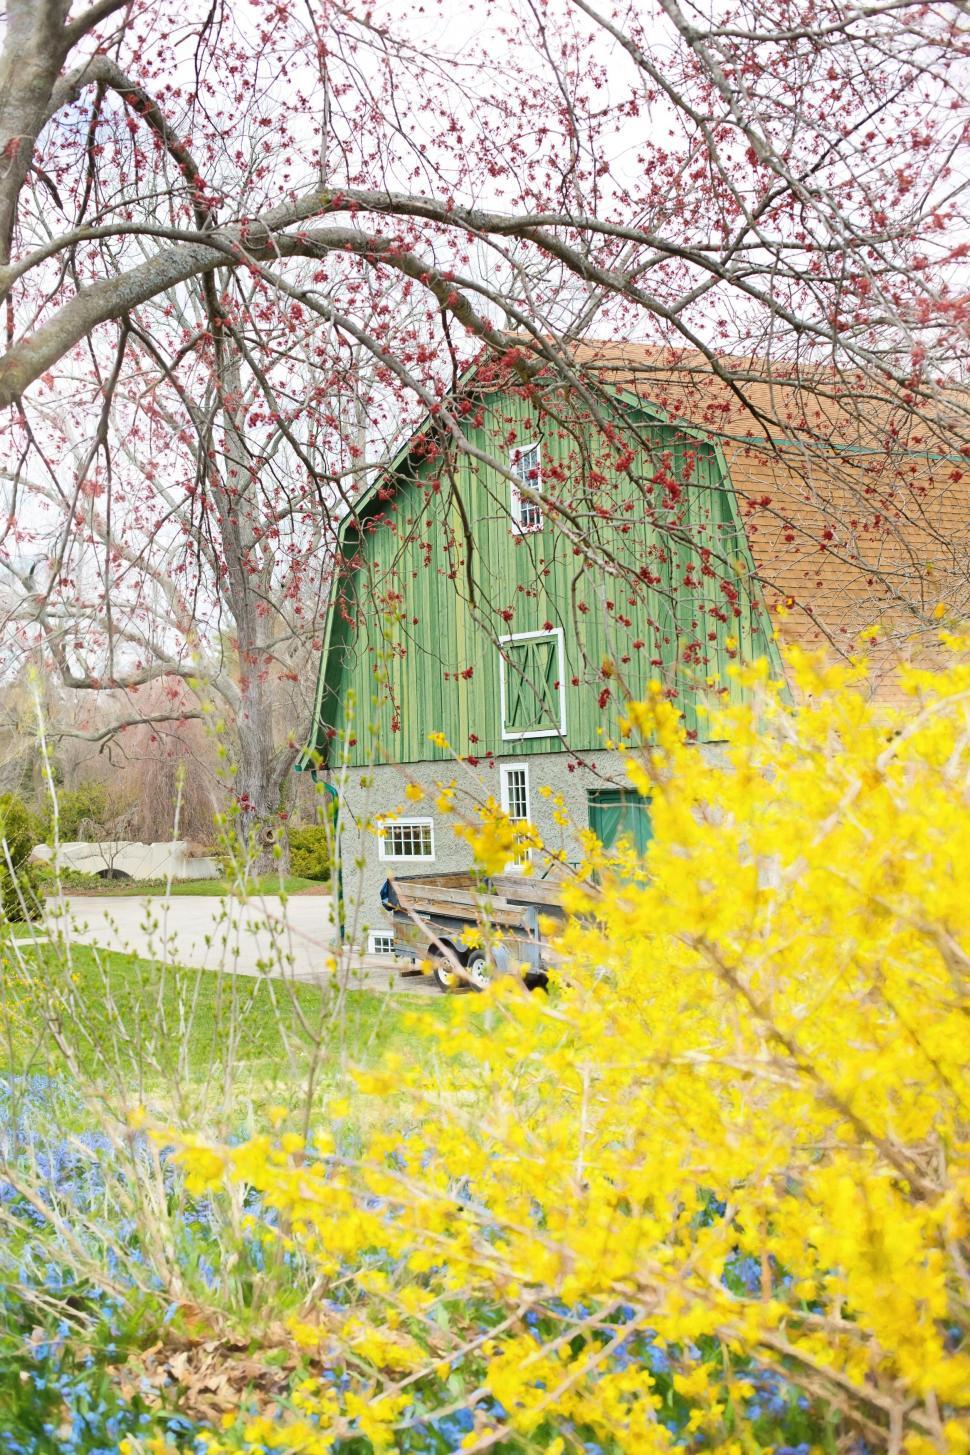 Free Image of Forsythia flowers and Barn  